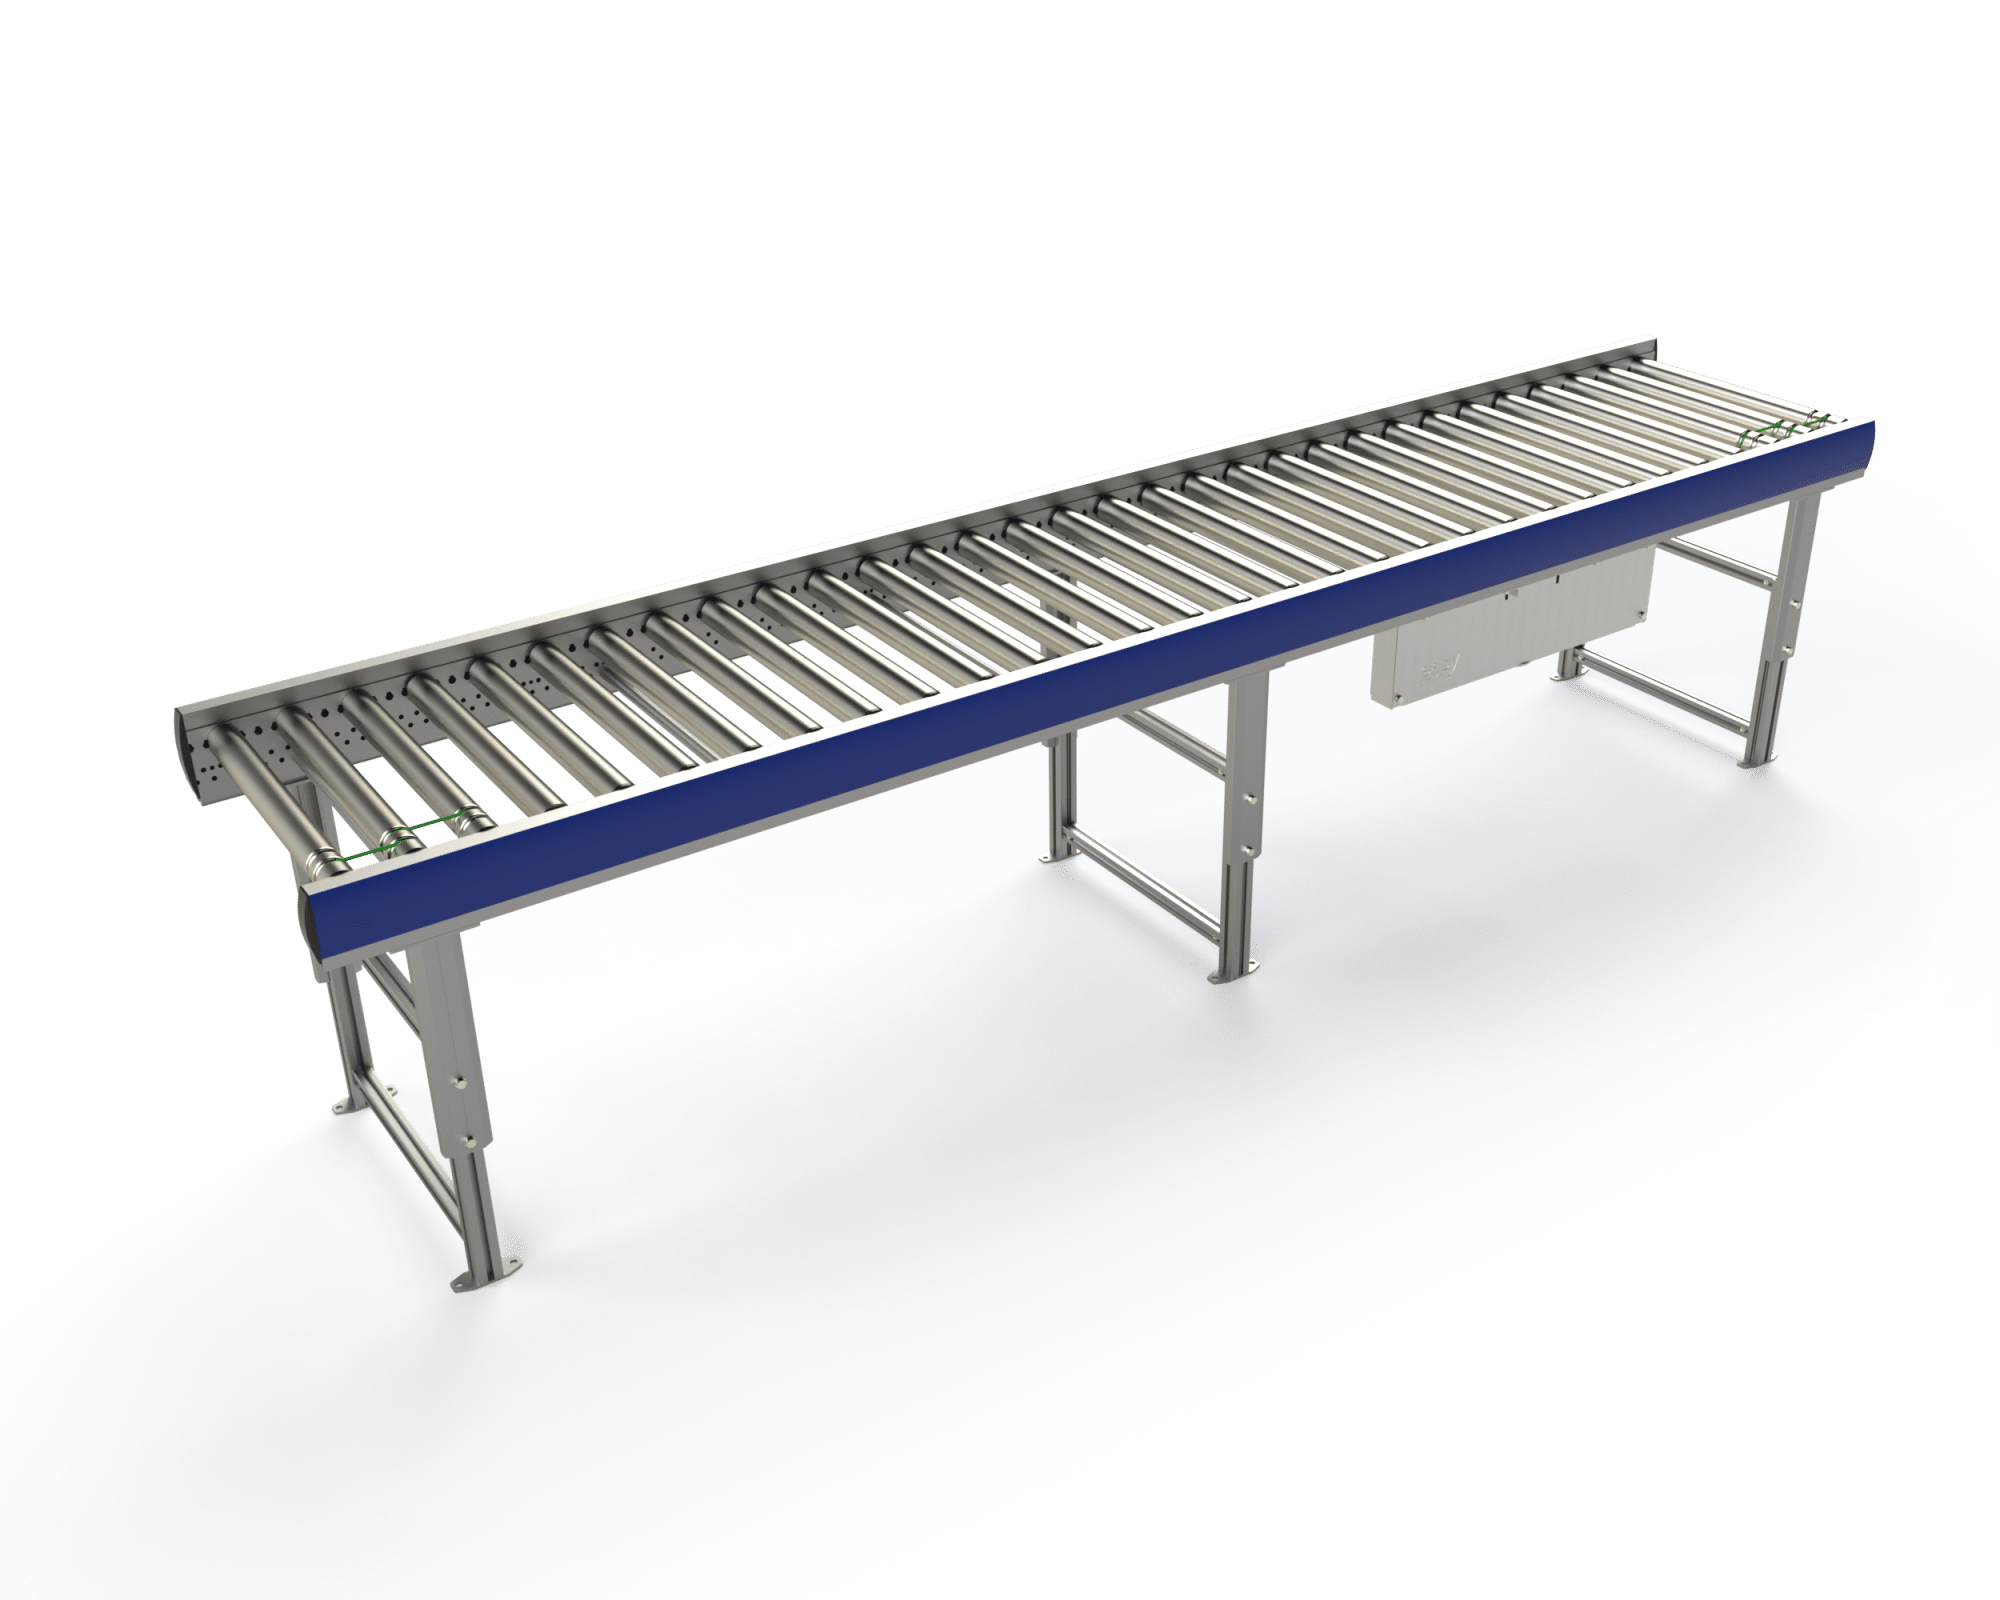 RCB roller conveyors come in different versions. You can build your own transport system with our modules.